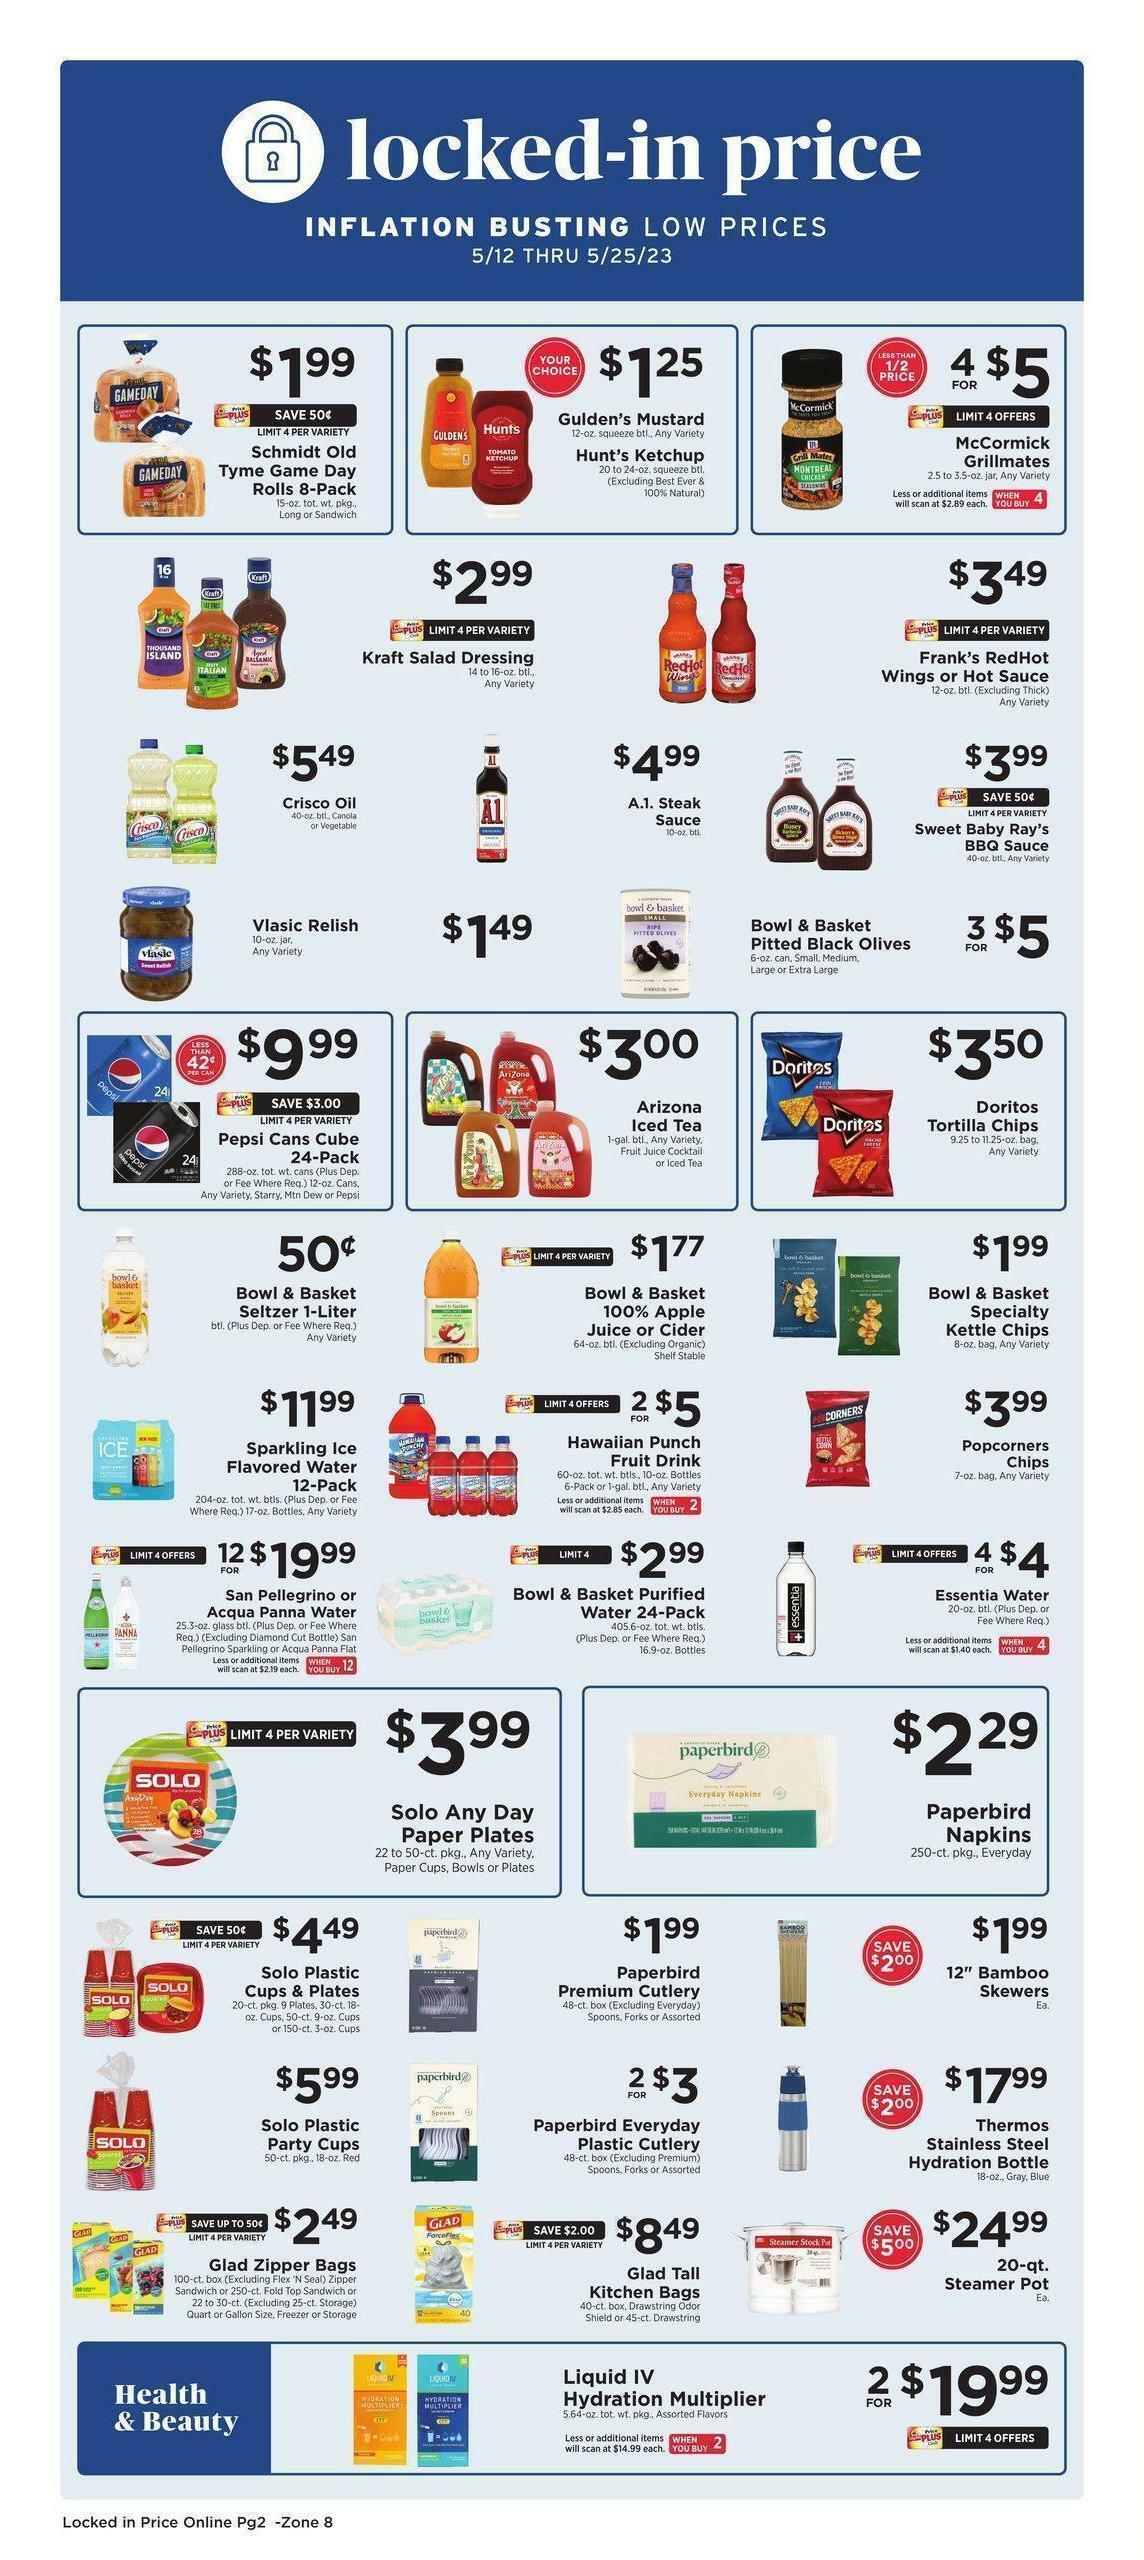 ShopRite Locked-in Price Weekly Ad from May 12